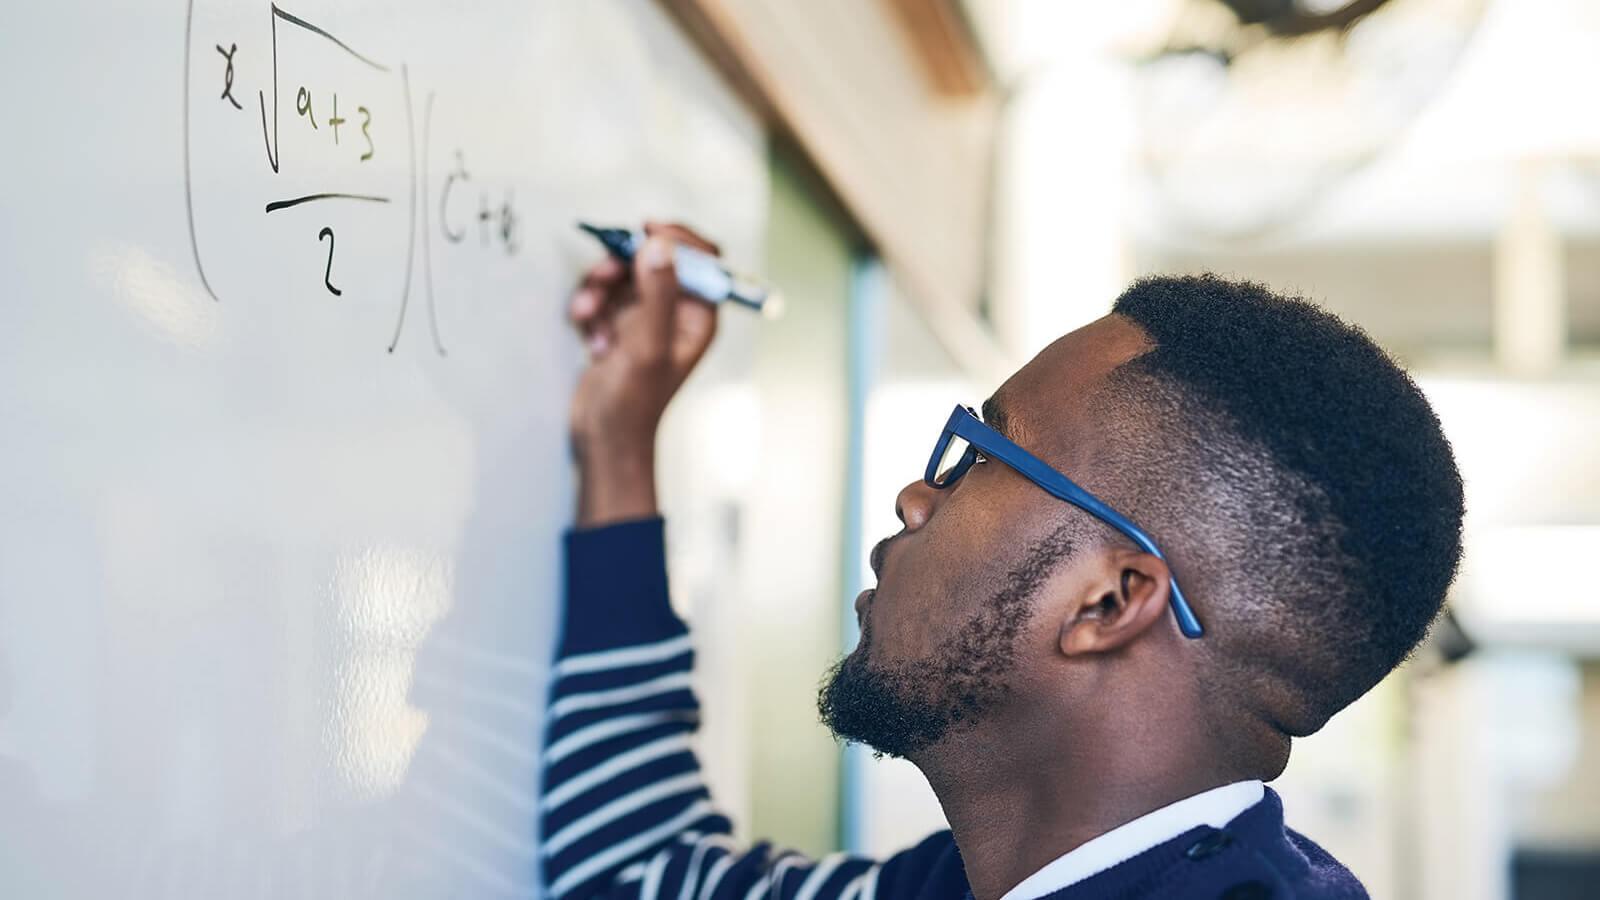 Black male student with glasses working on math equation at whiteboard